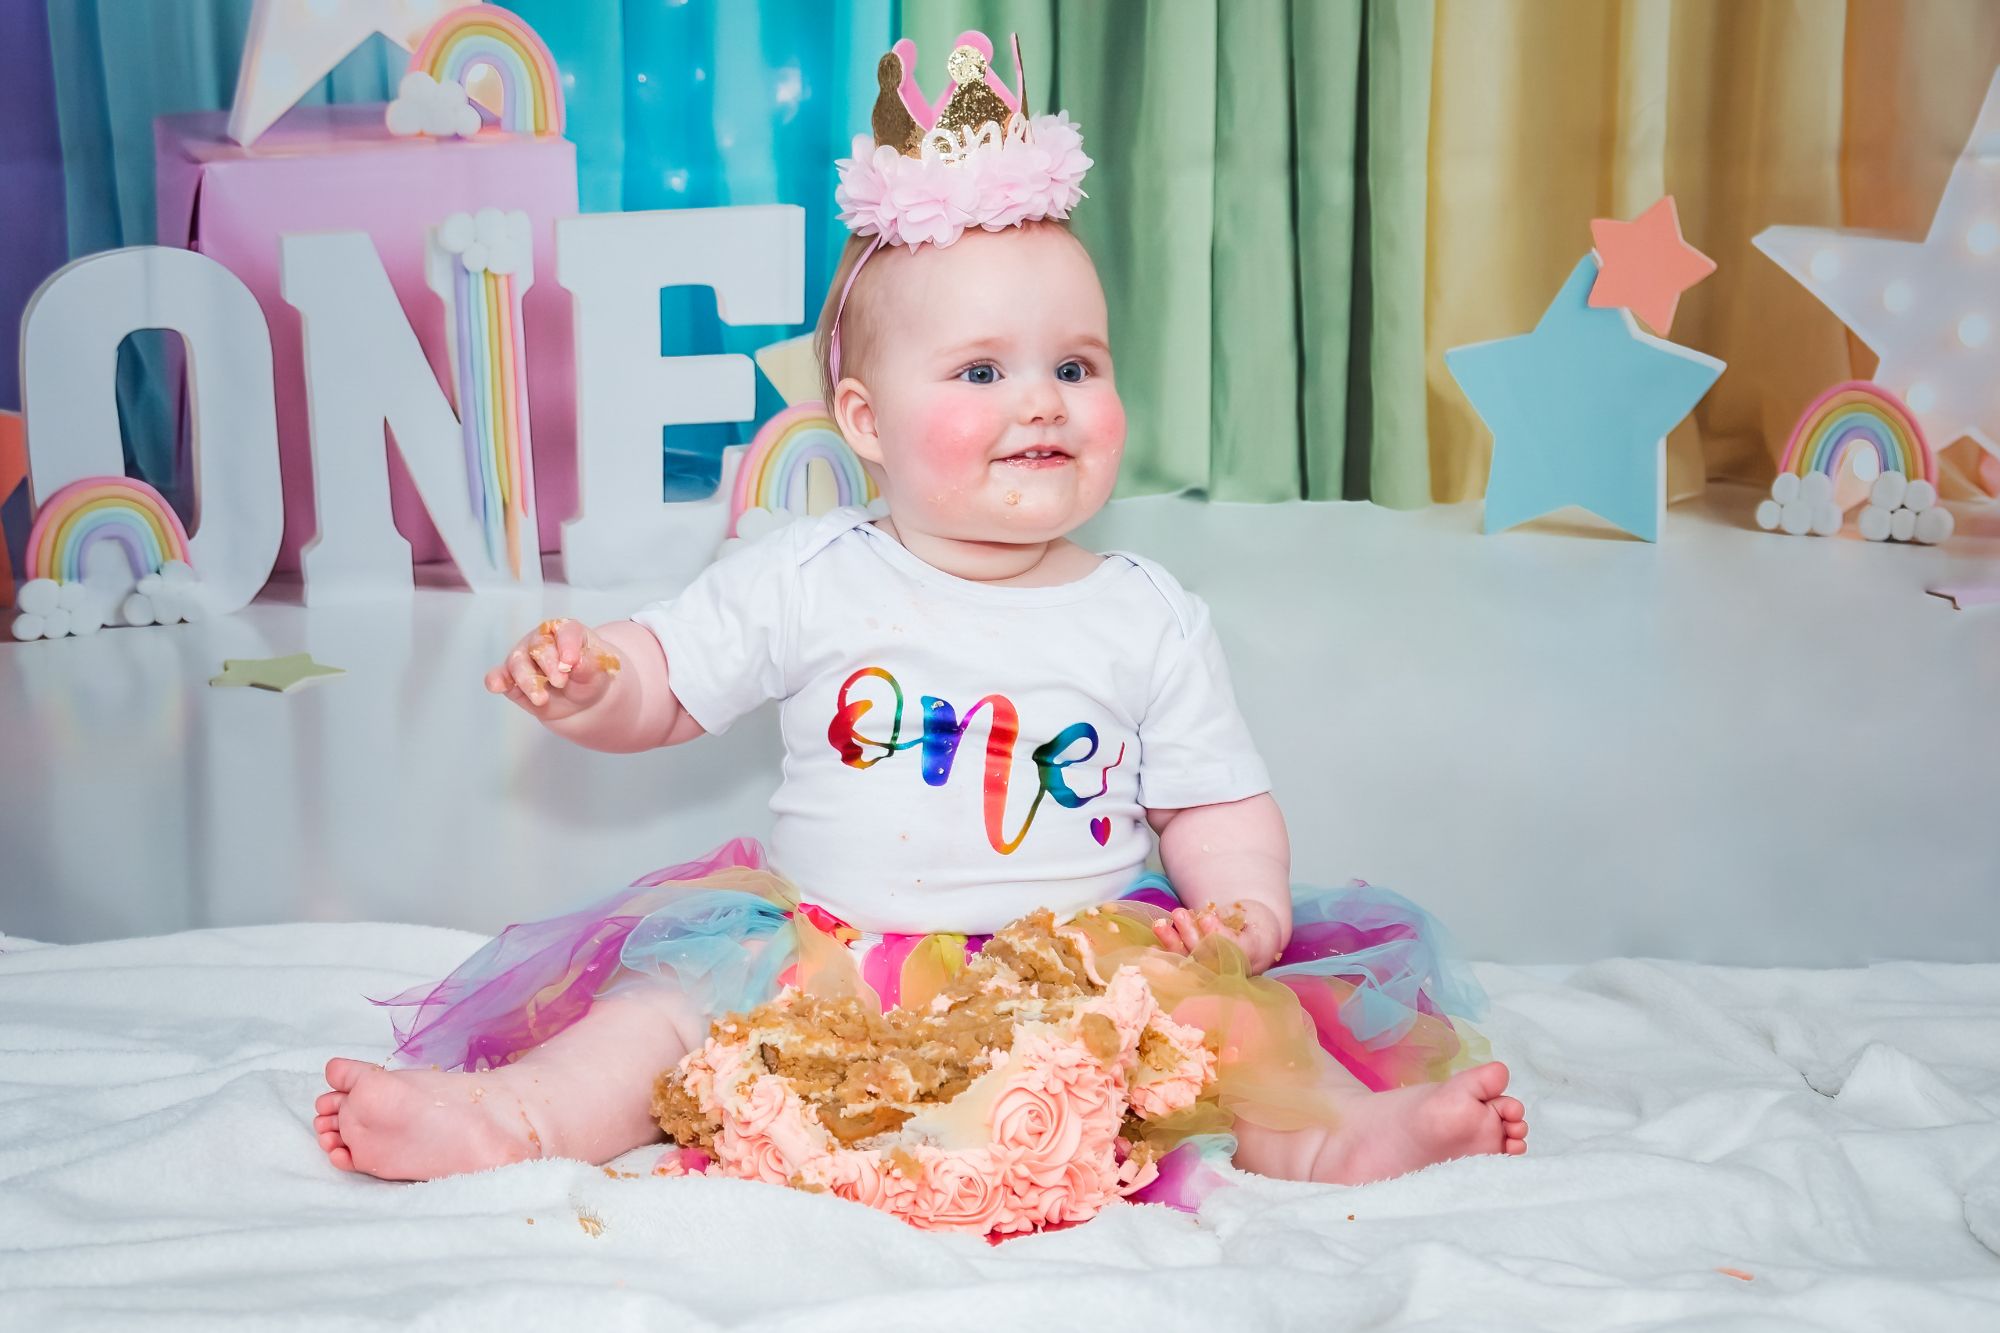 A little girl sits and smiles to her mummy who's off camera. The little girl has a mess of cake in front of her